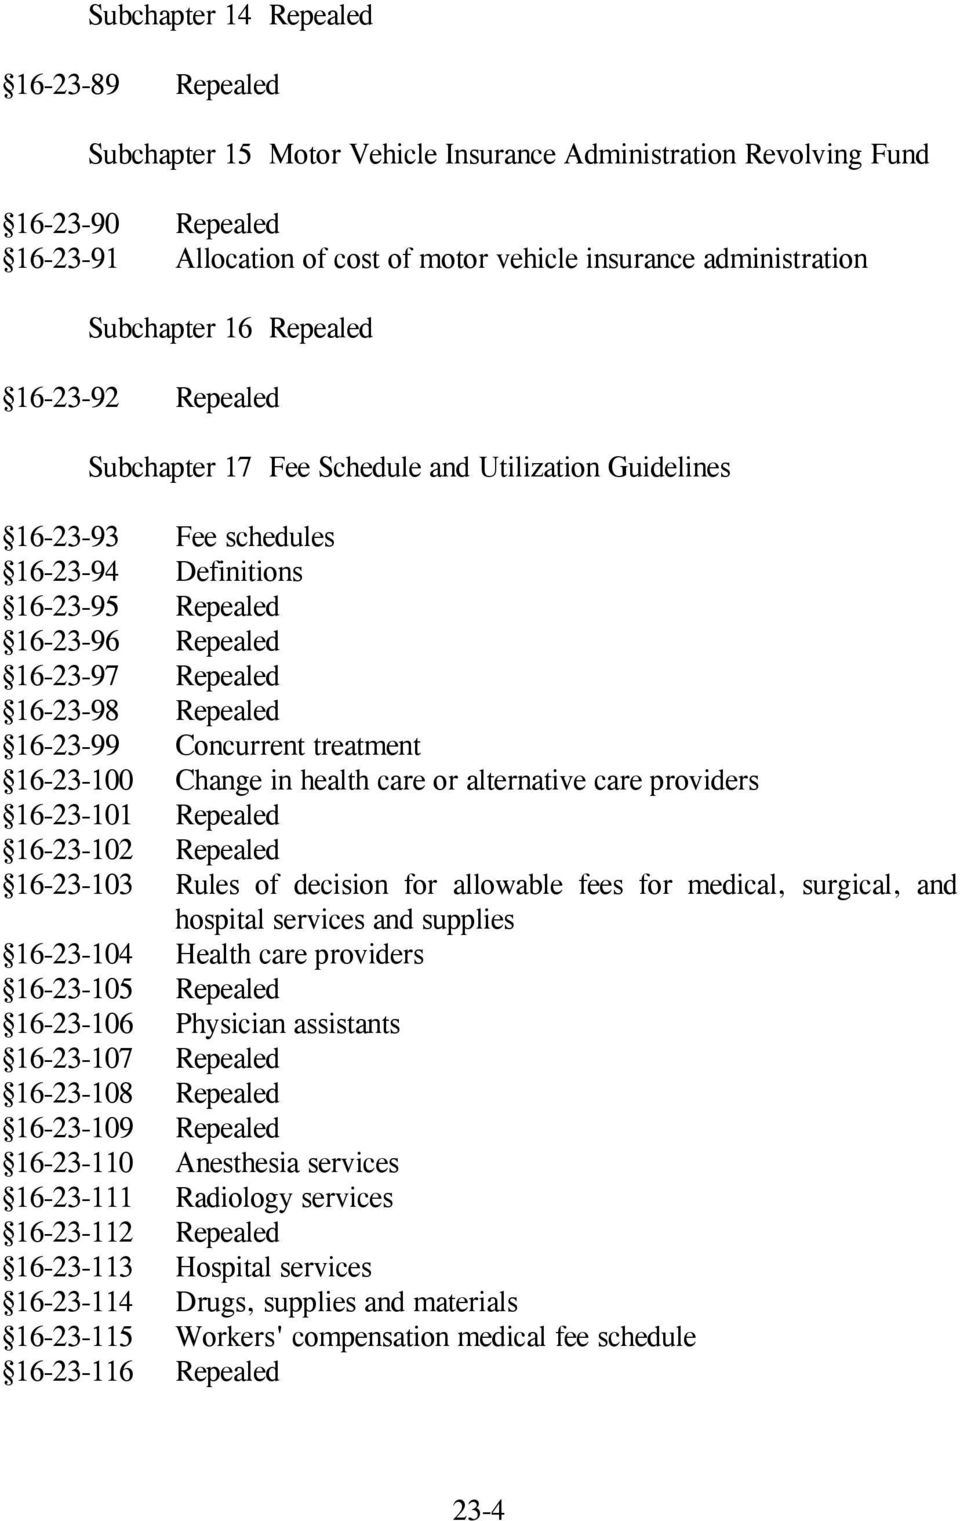 16-23-98 Repealed 16-23-99 Concurrent treatment 16-23-100 Change in health care or alternative care providers 16-23-101 Repealed 16-23-102 Repealed 16-23-103 Rules of decision for allowable fees for